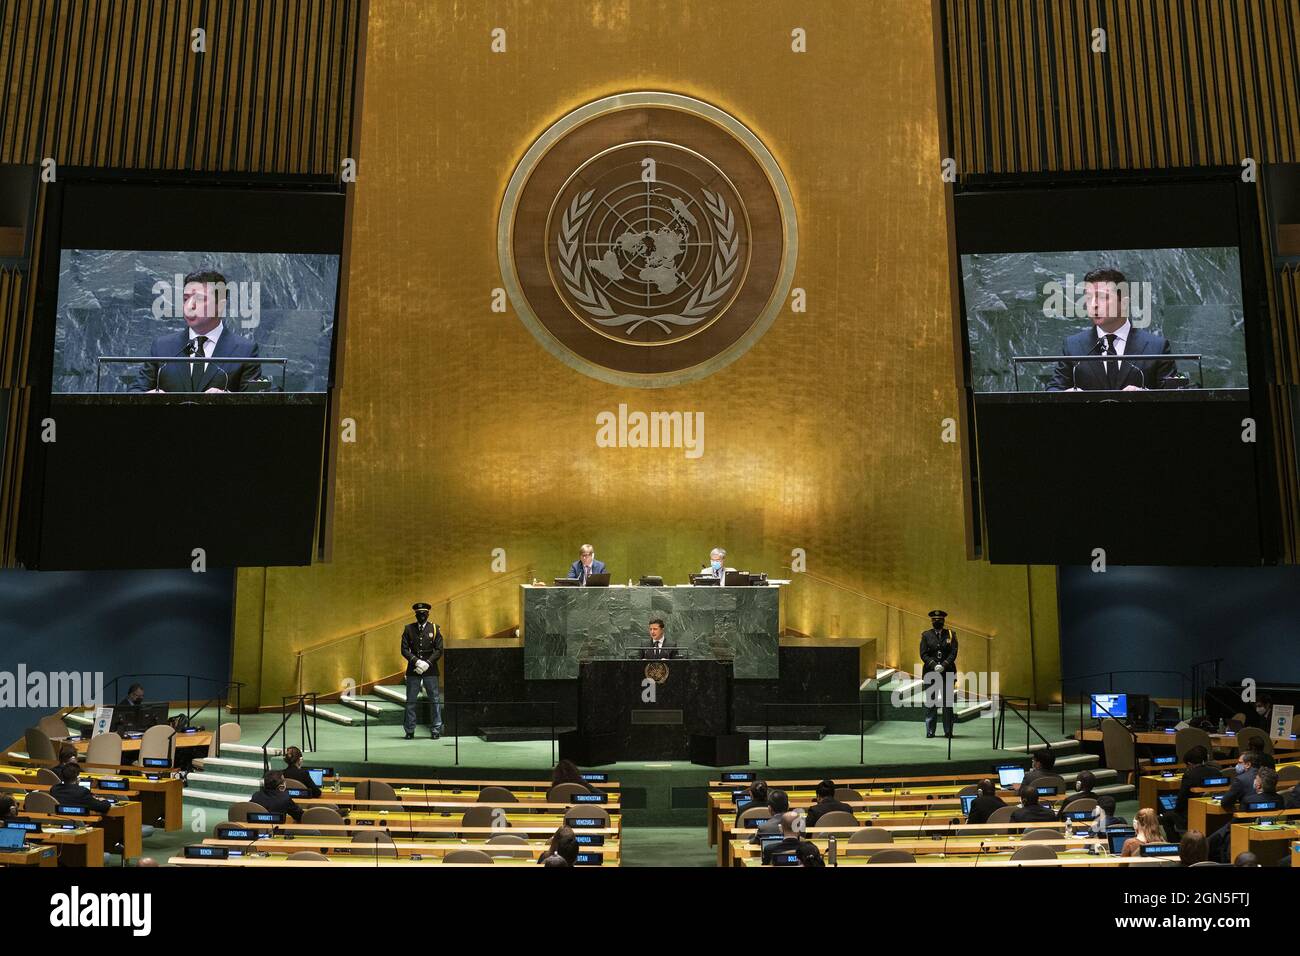 New York, United States. 22nd Sep, 2021. Ukraine's President Volodymyr Zelenskiy addresses the UN General Assembly 76th session General Debate in UN General Assembly Hall at the United Nations Headquarters on Wednesday, September 22, 2021 in New York City. Pool Photo by Eduardo Munoz/UPI Credit: UPI/Alamy Live News Stock Photo